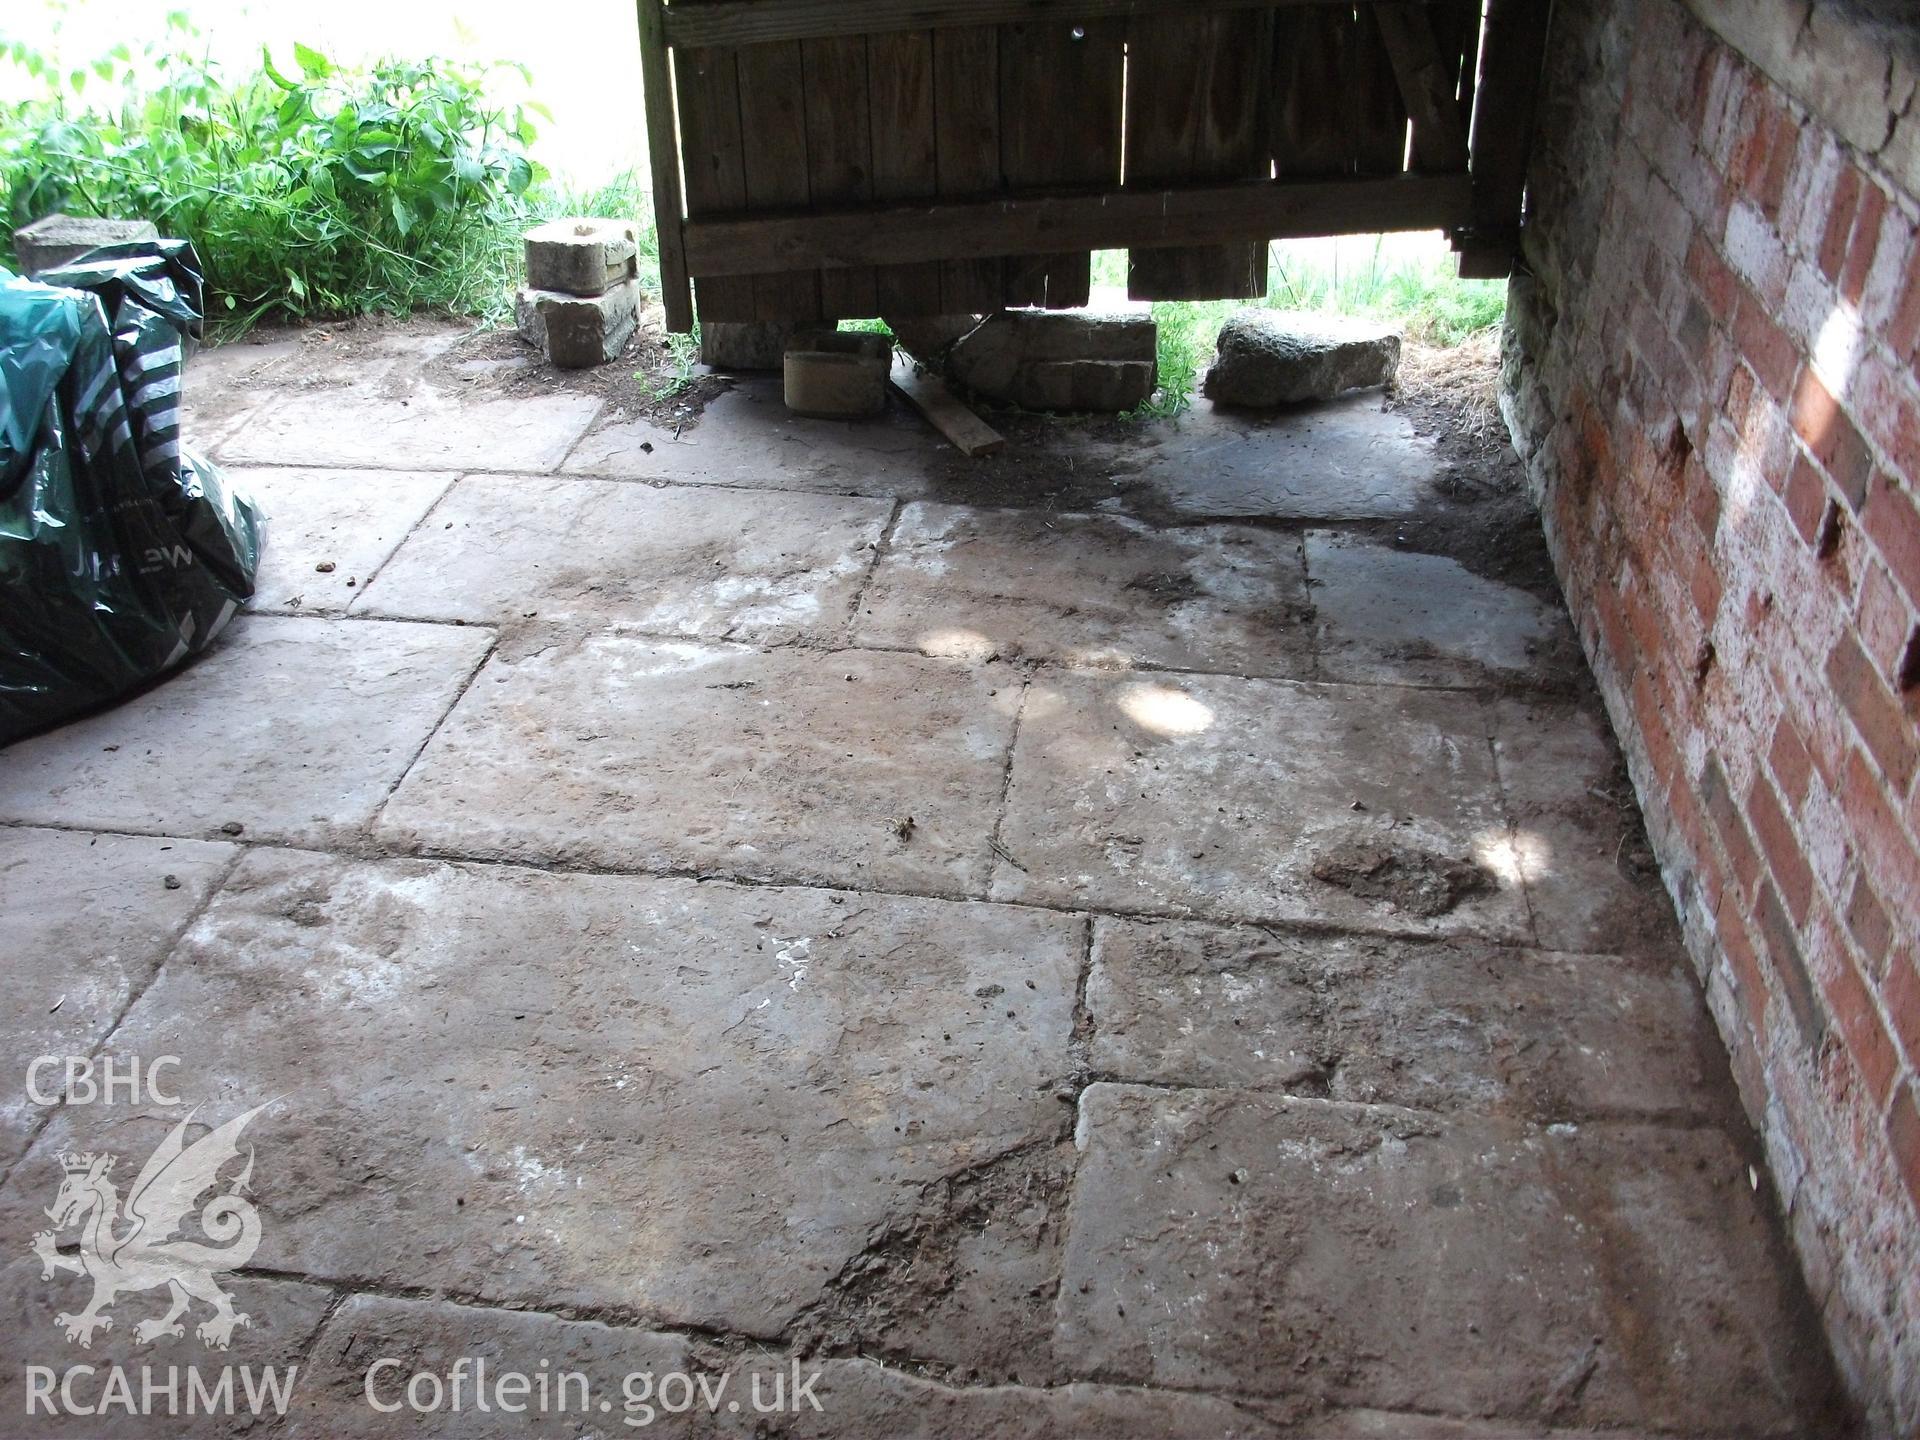 Colour digital photograph of interior of barn - floor; at Llangwm Isaf Farm, received in the course of Emergency Recording case ref no RCS2/1/1599.